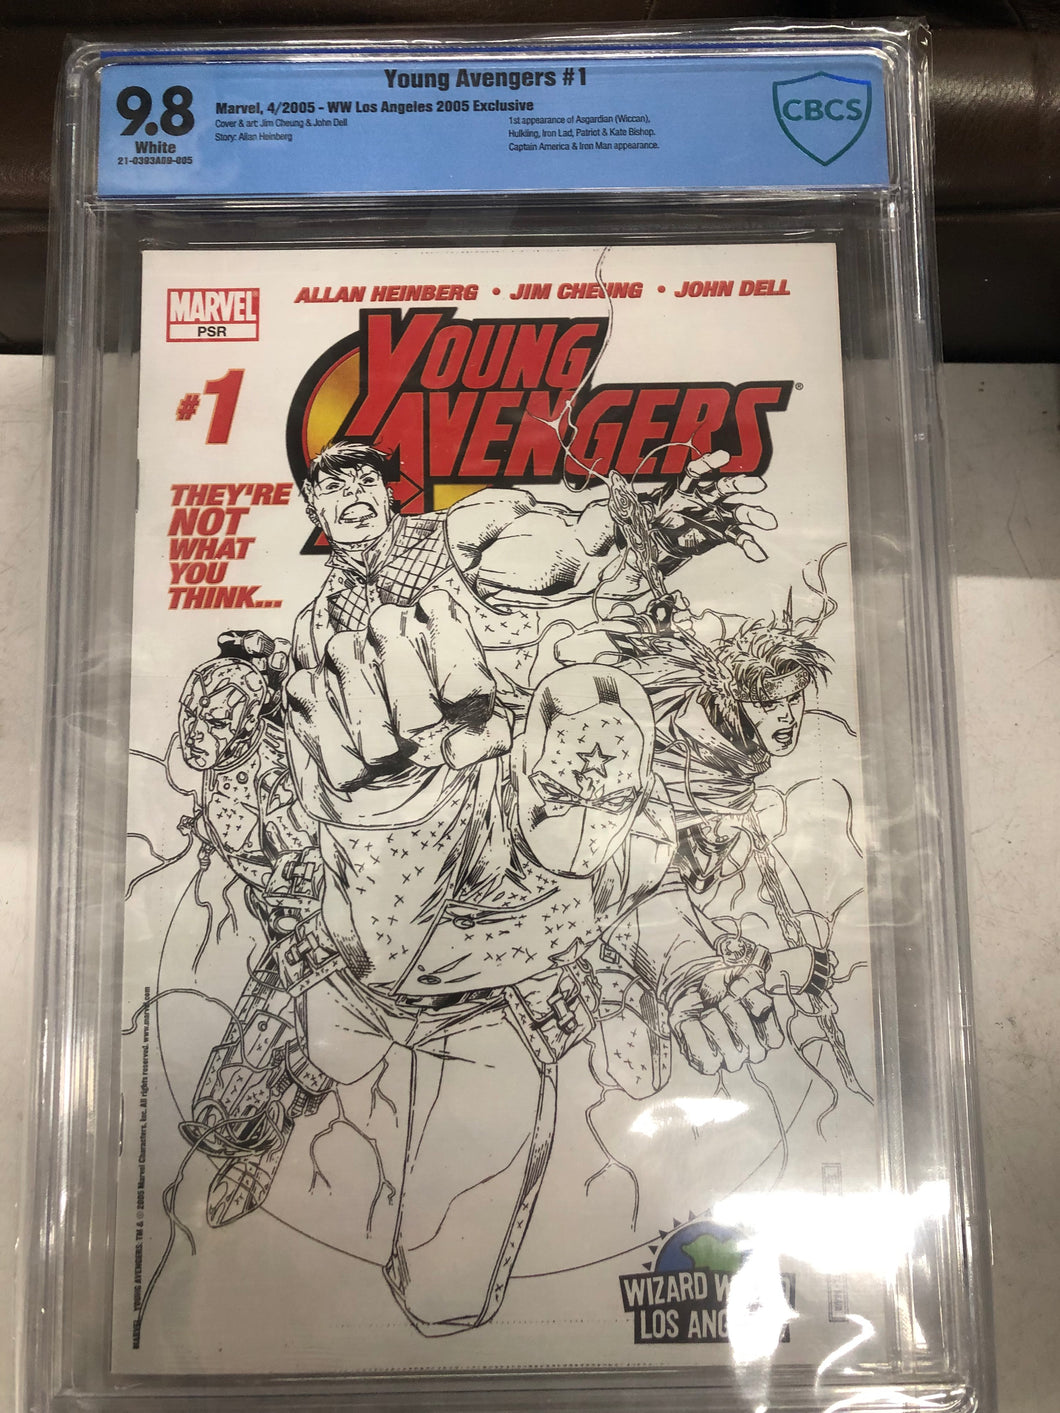 YOUNG AVENGERS #1 - WW Los Angeles 2005 EXCLUSIVE - CBCS 9.8